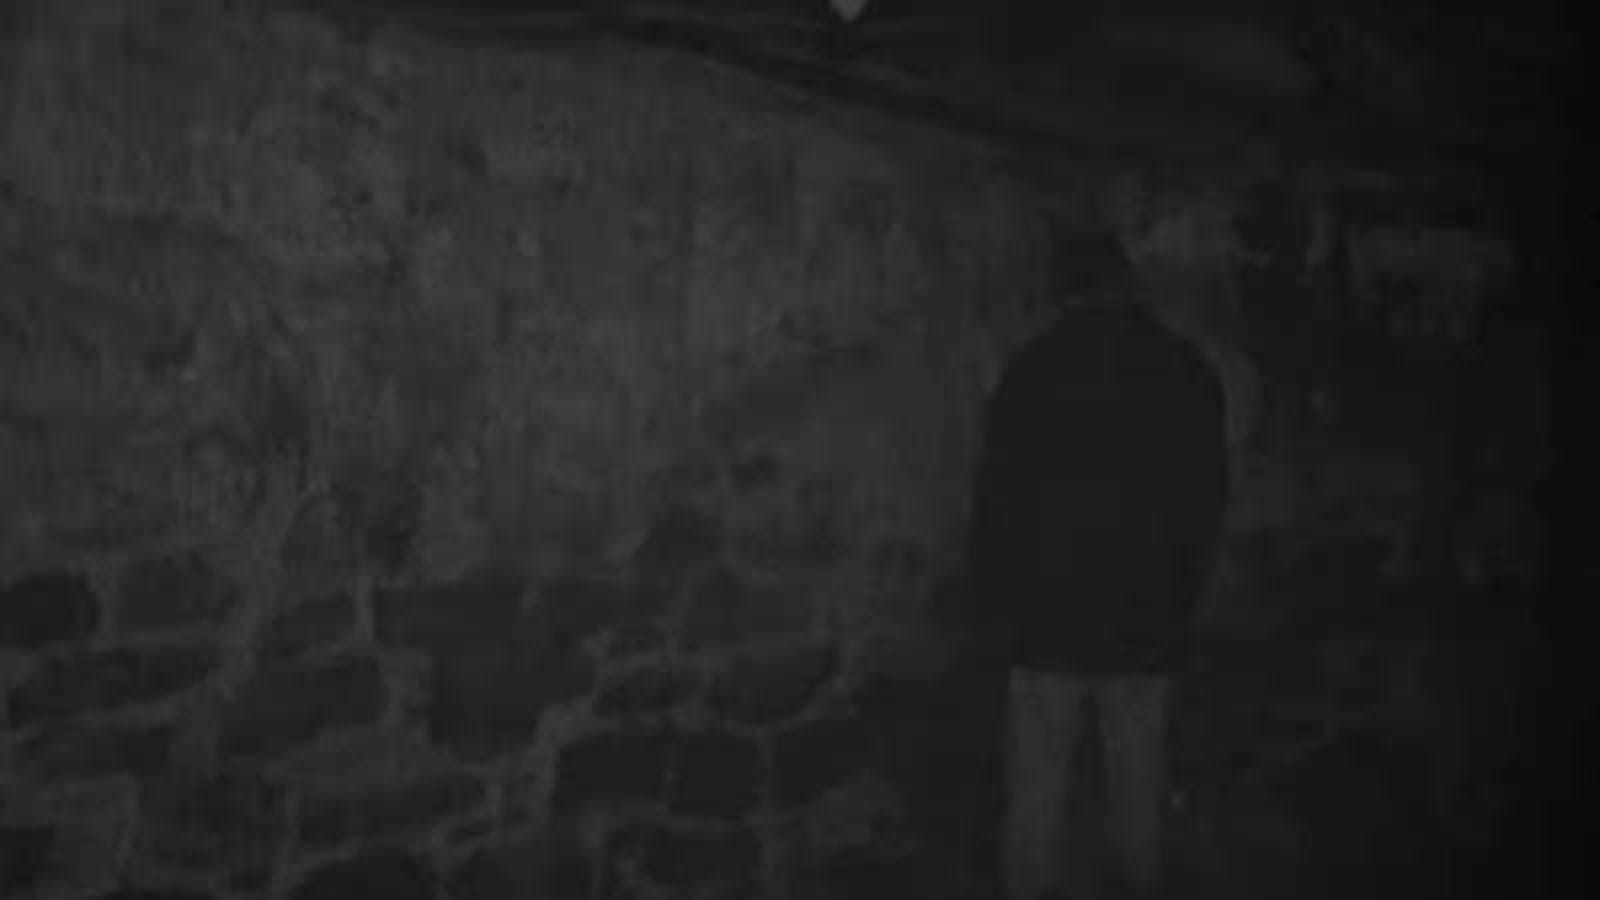 The Blair Witch Project almost had a much less subtle ending